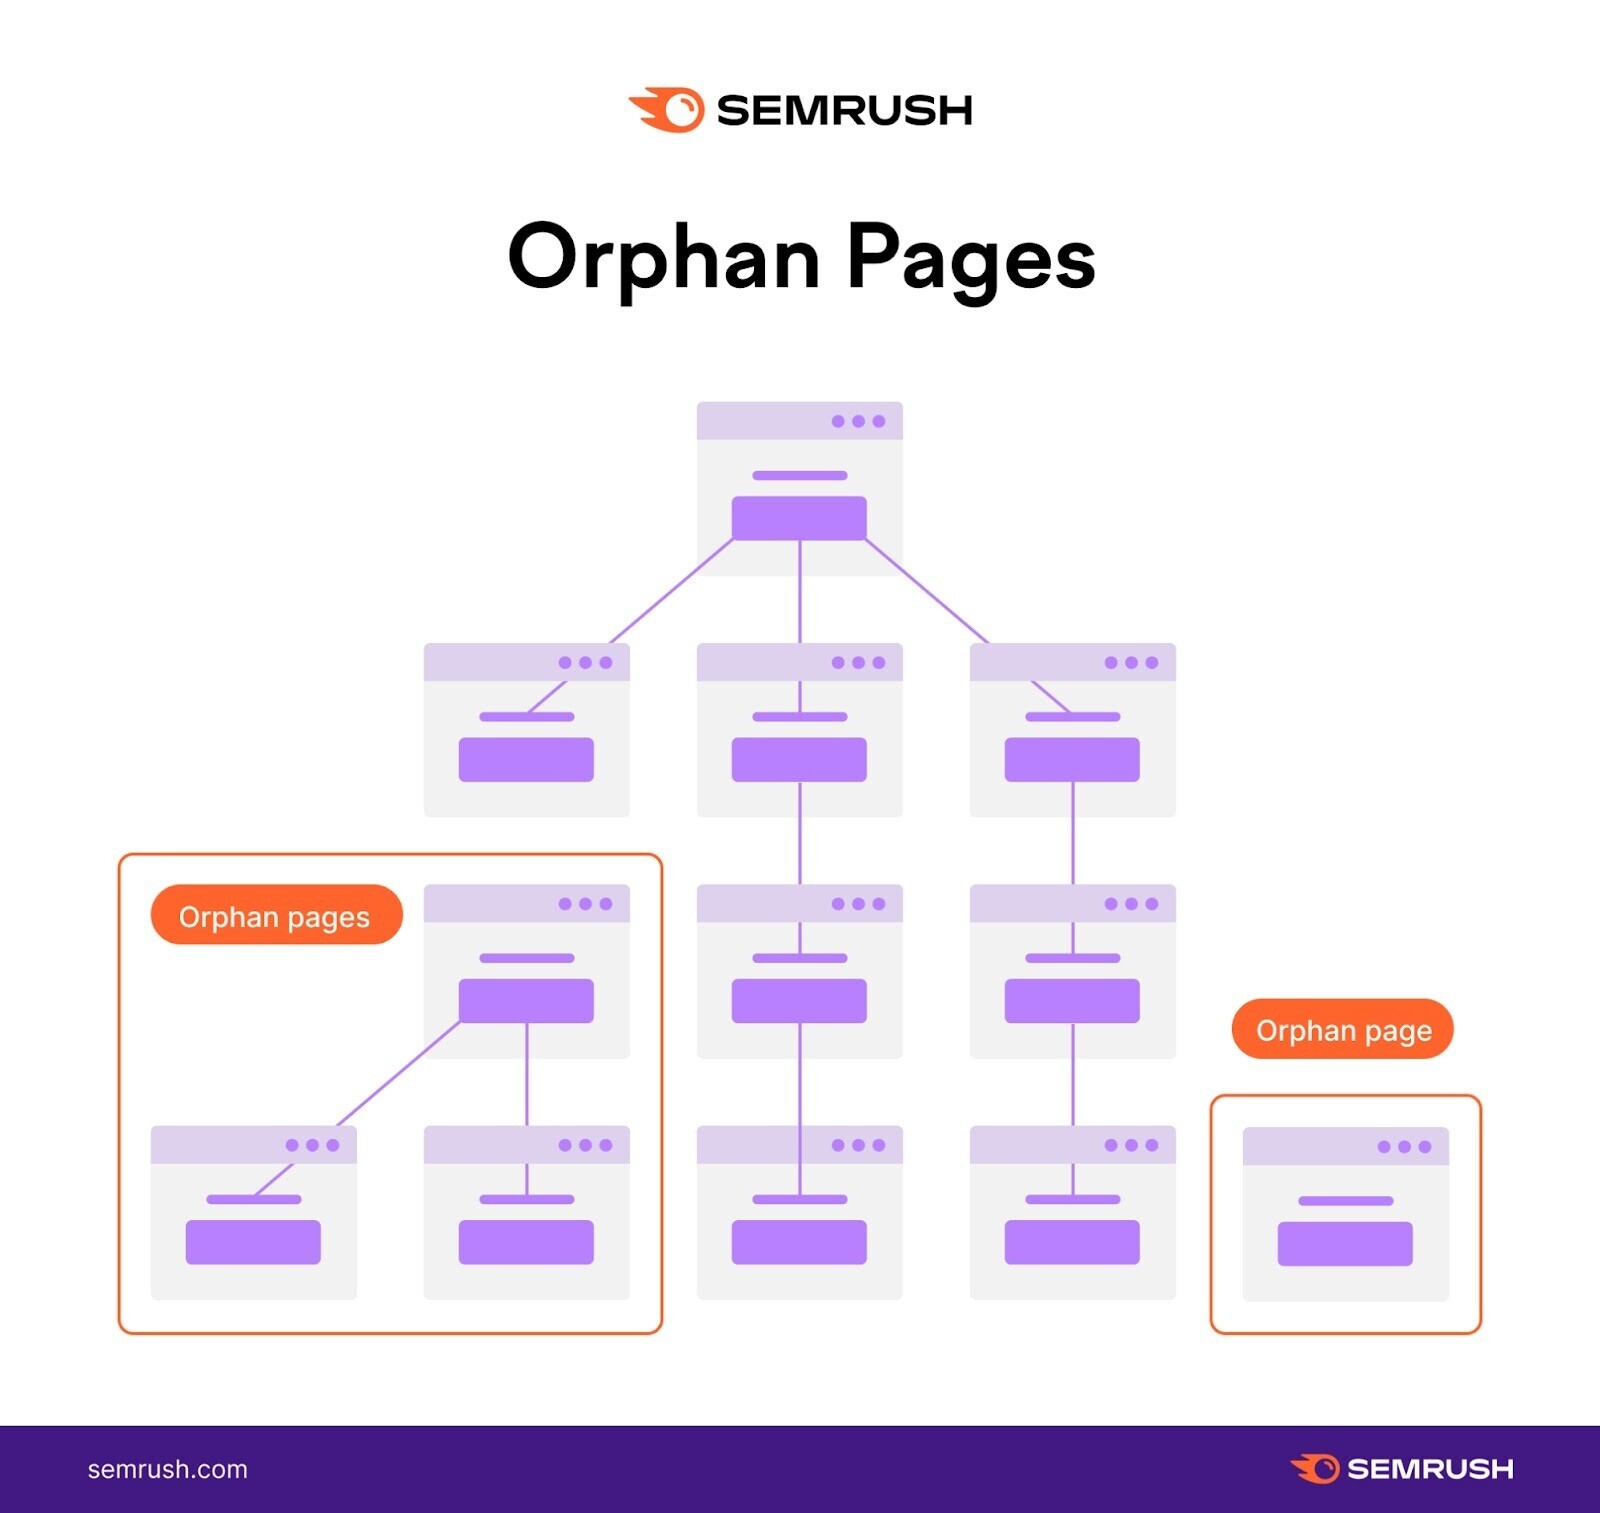 "Orphan pages" infographic